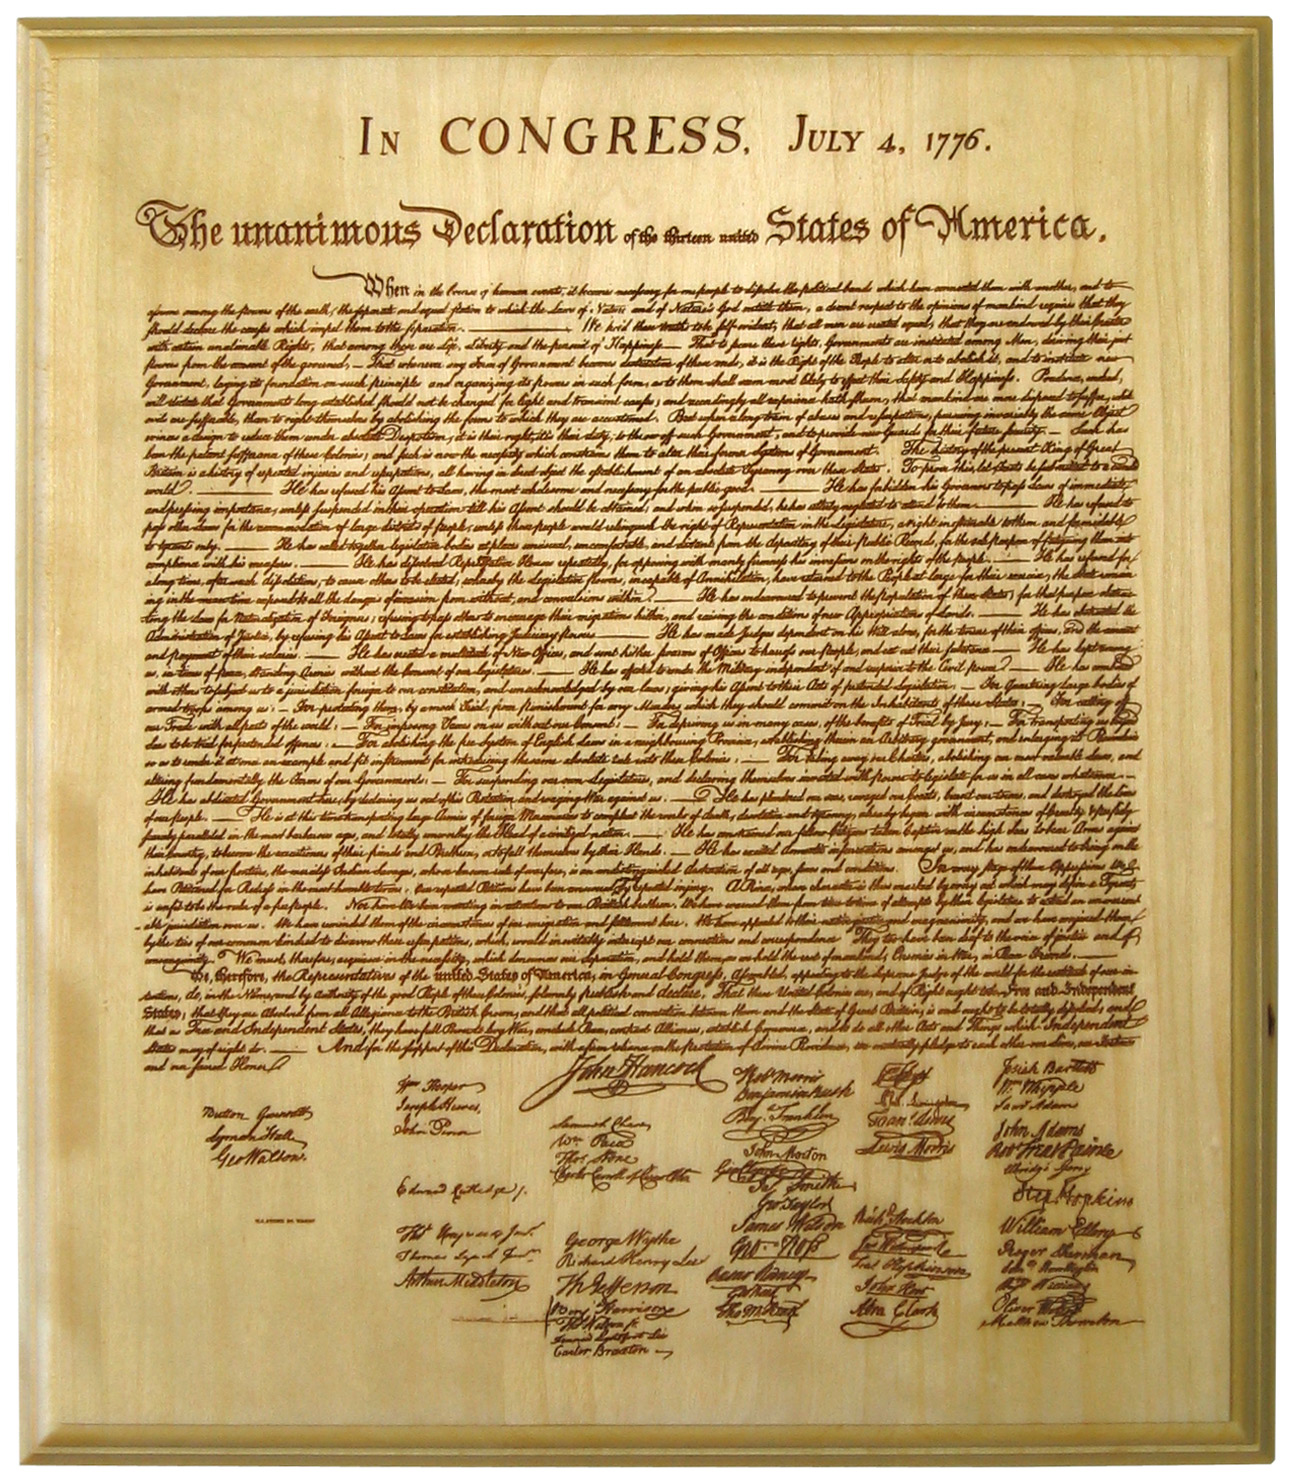 the declaration of independence